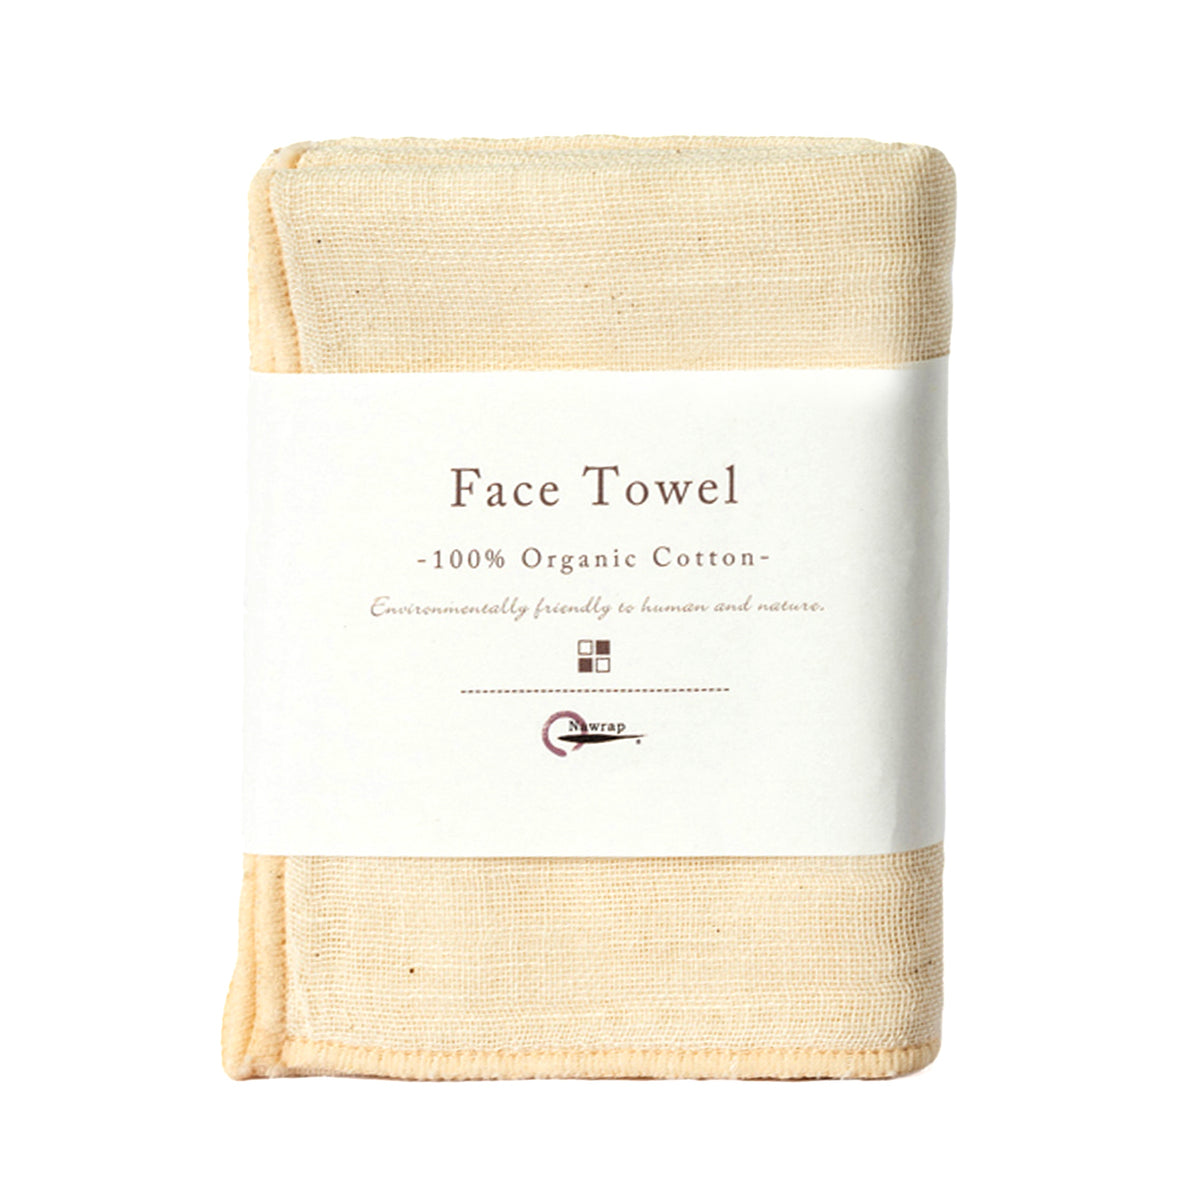 Nawrap Organic Cotton Face Towel - Natural: Official Stockist